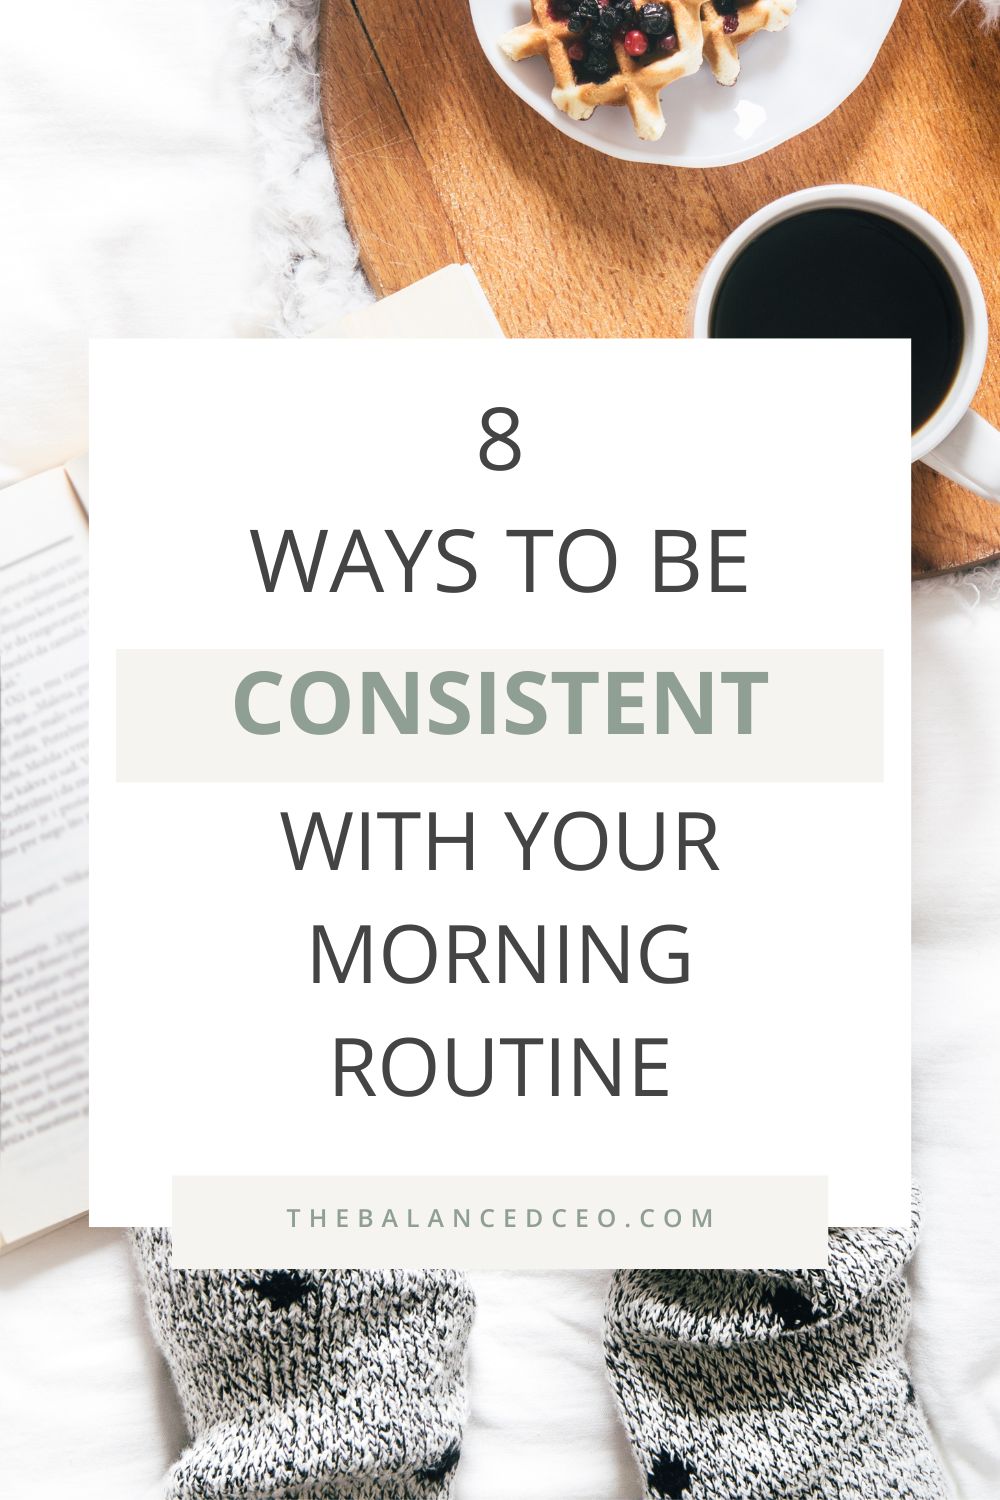 8 Ways to be Consistent with Your Morning Routine